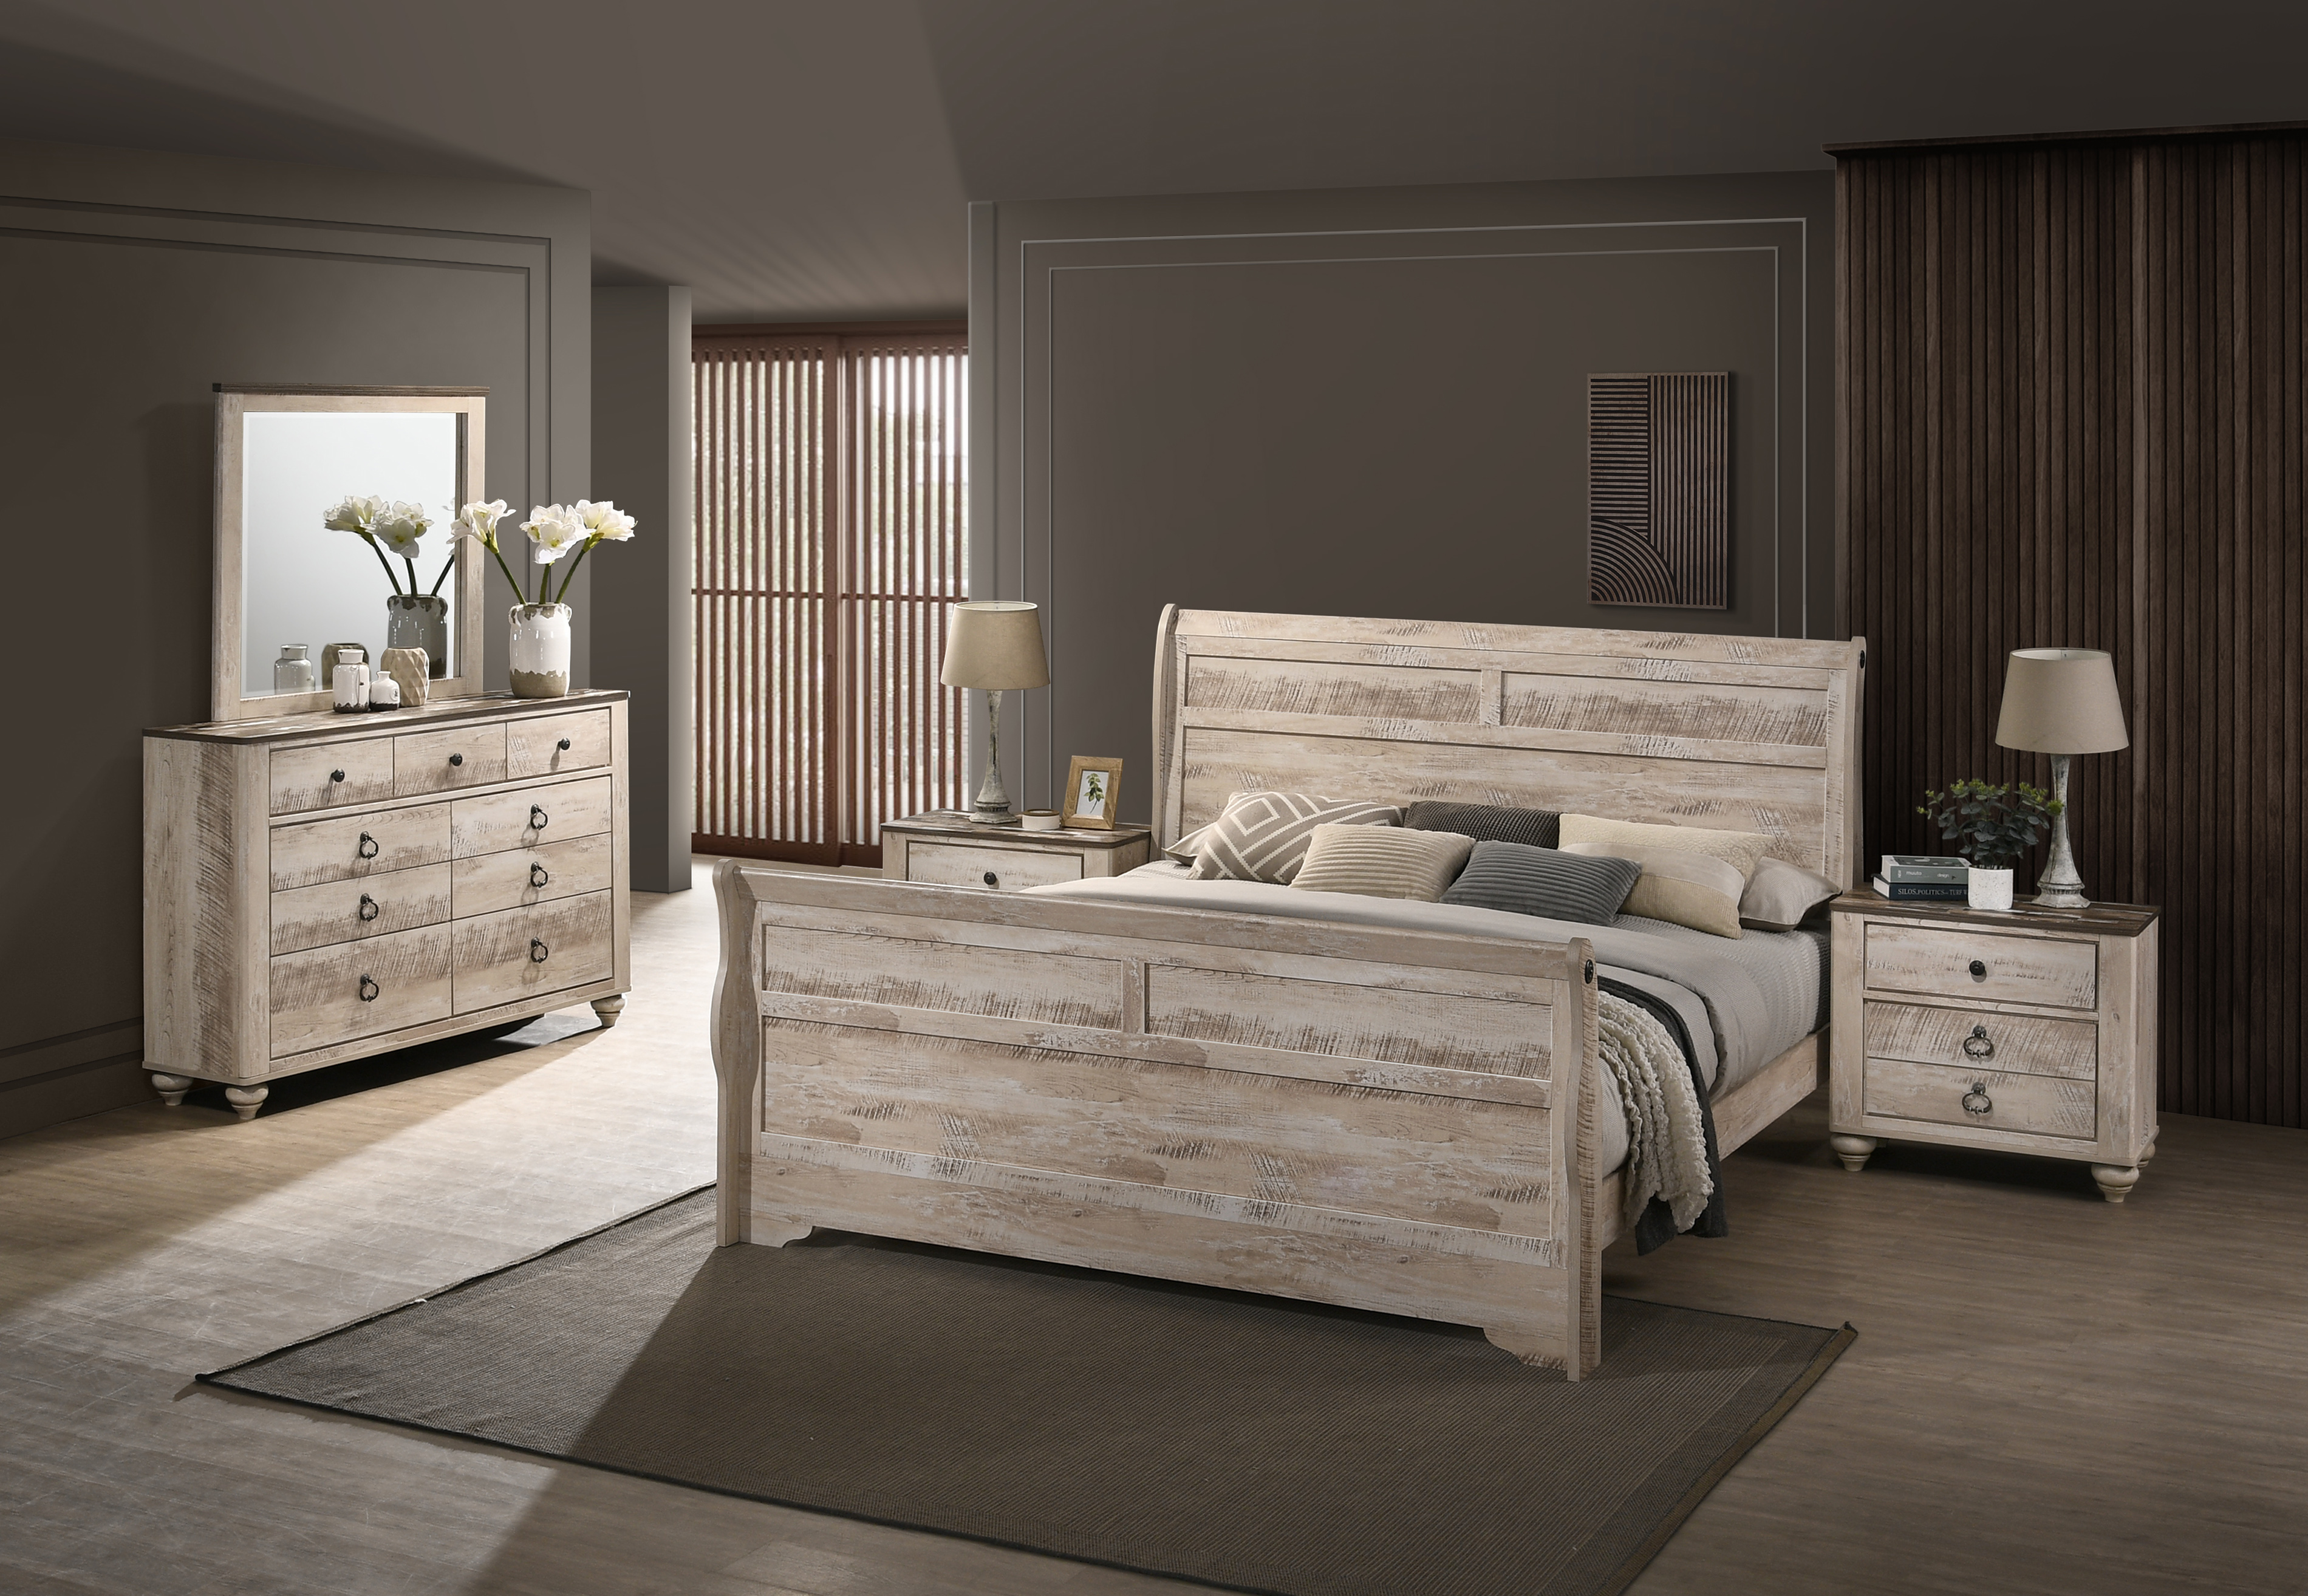 Imerland Contemporary White Wash Finish Bedroom Set with Queen Sleigh Bed, Dresser, Mirror, Two Nightstands - image 1 of 11